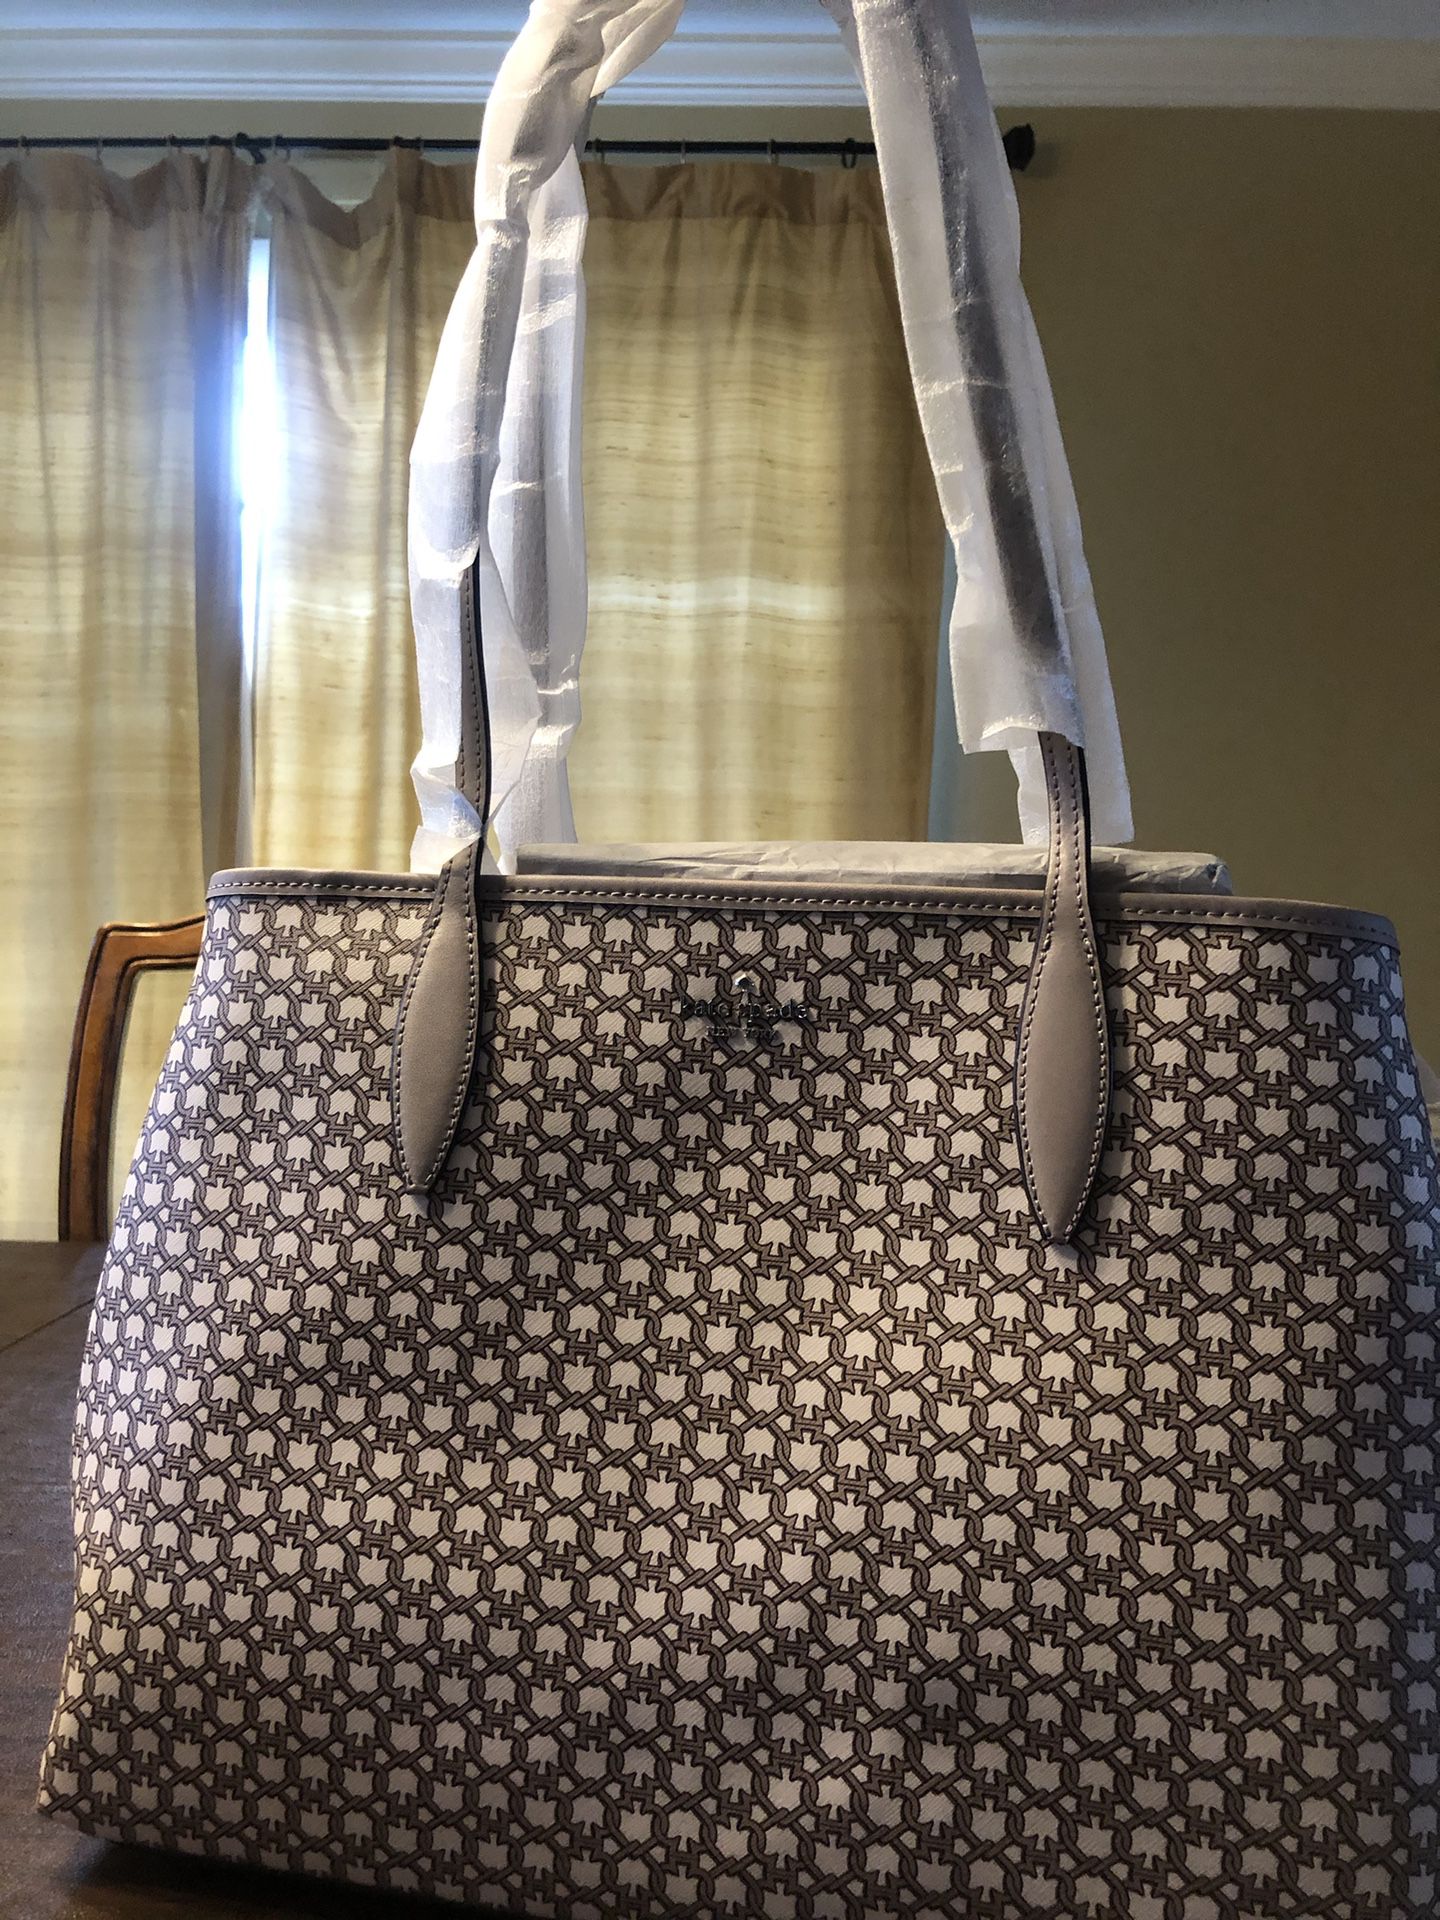 Authentic Kate Spade Handbag New In Box for Sale in Camp Hill, PA - OfferUp